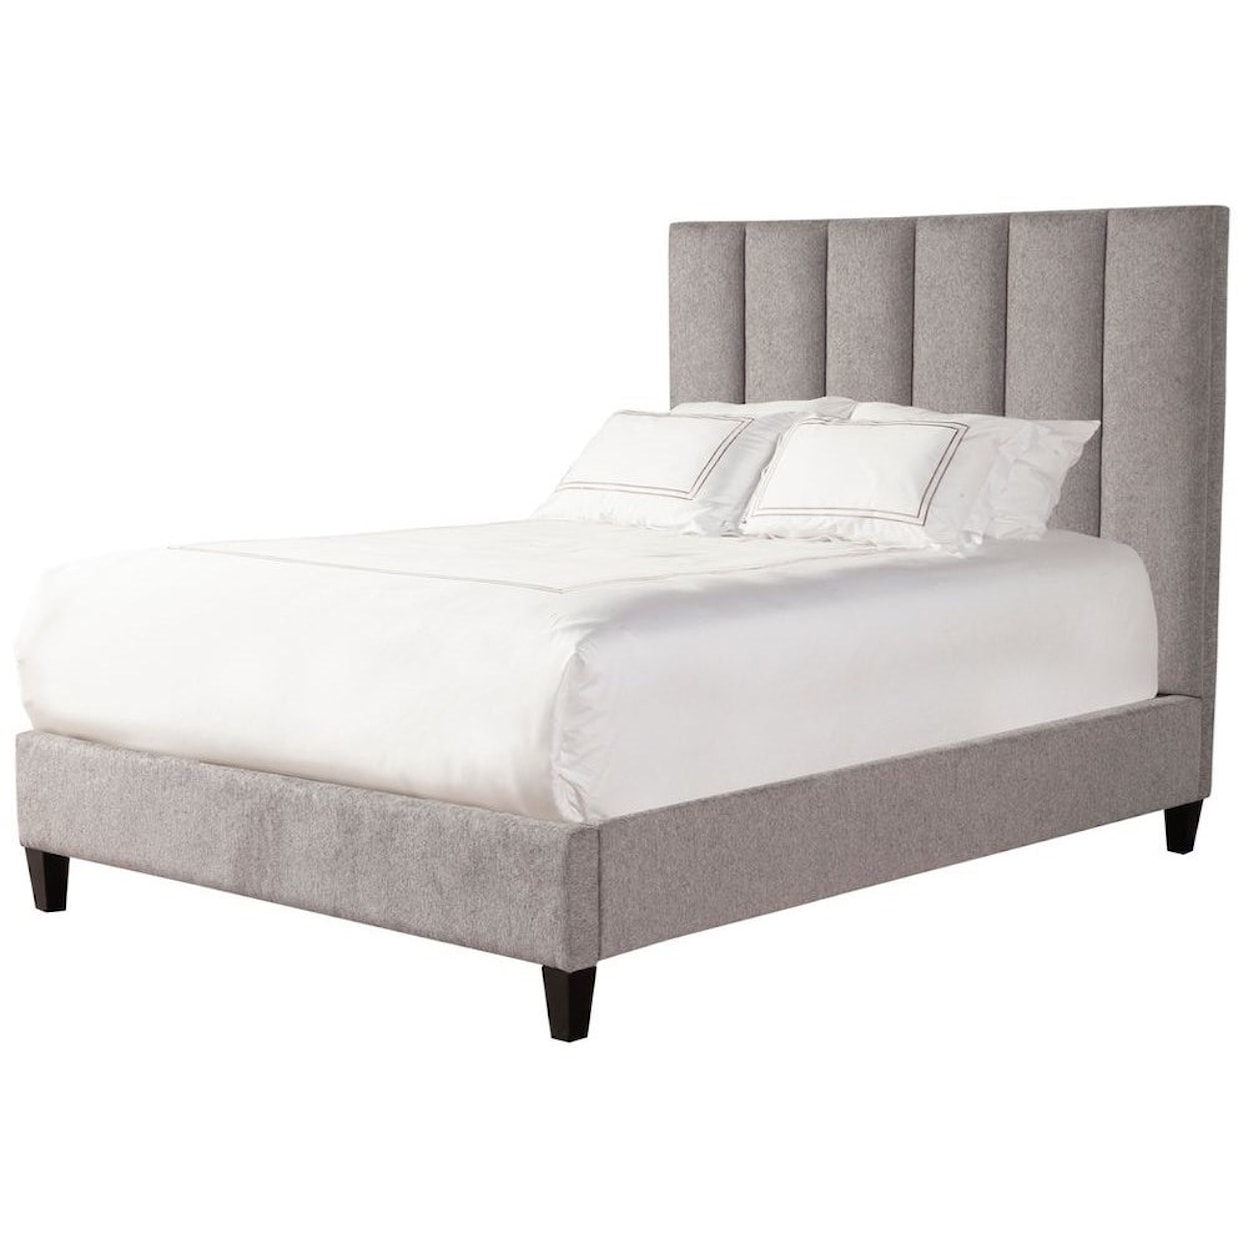 Carolina Living Avery Queen Upholstered Bed